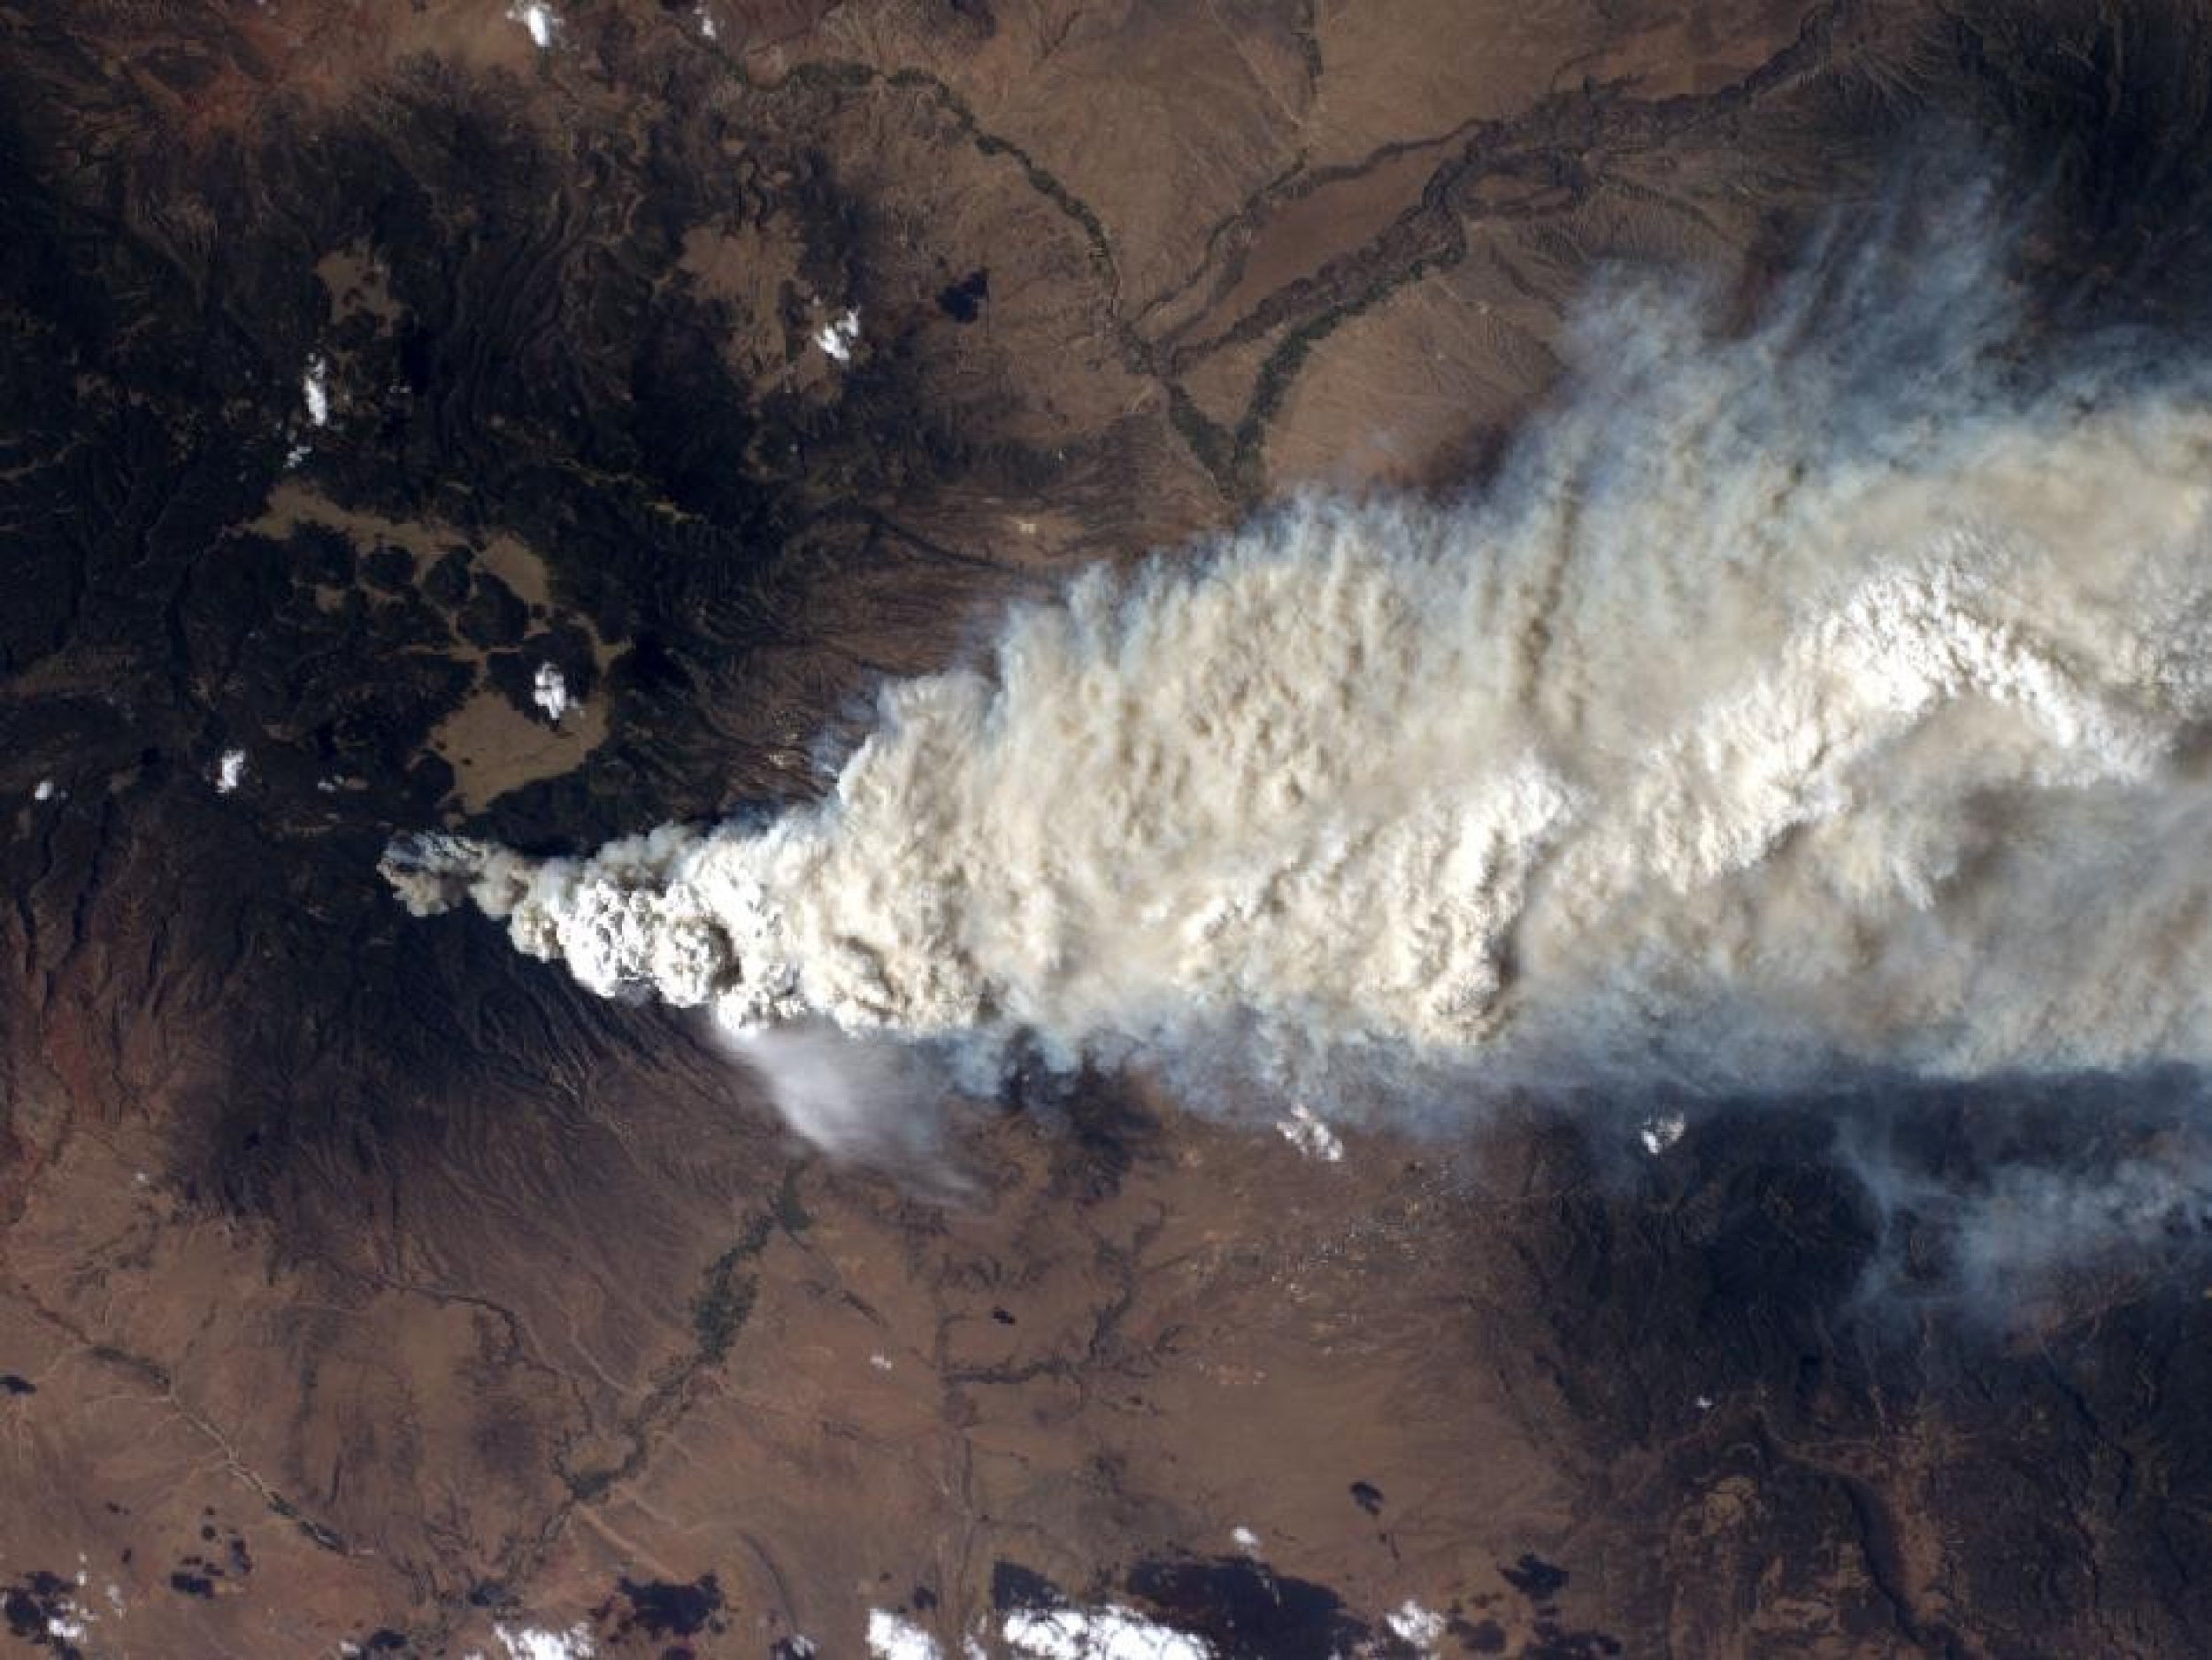 NASA fire images